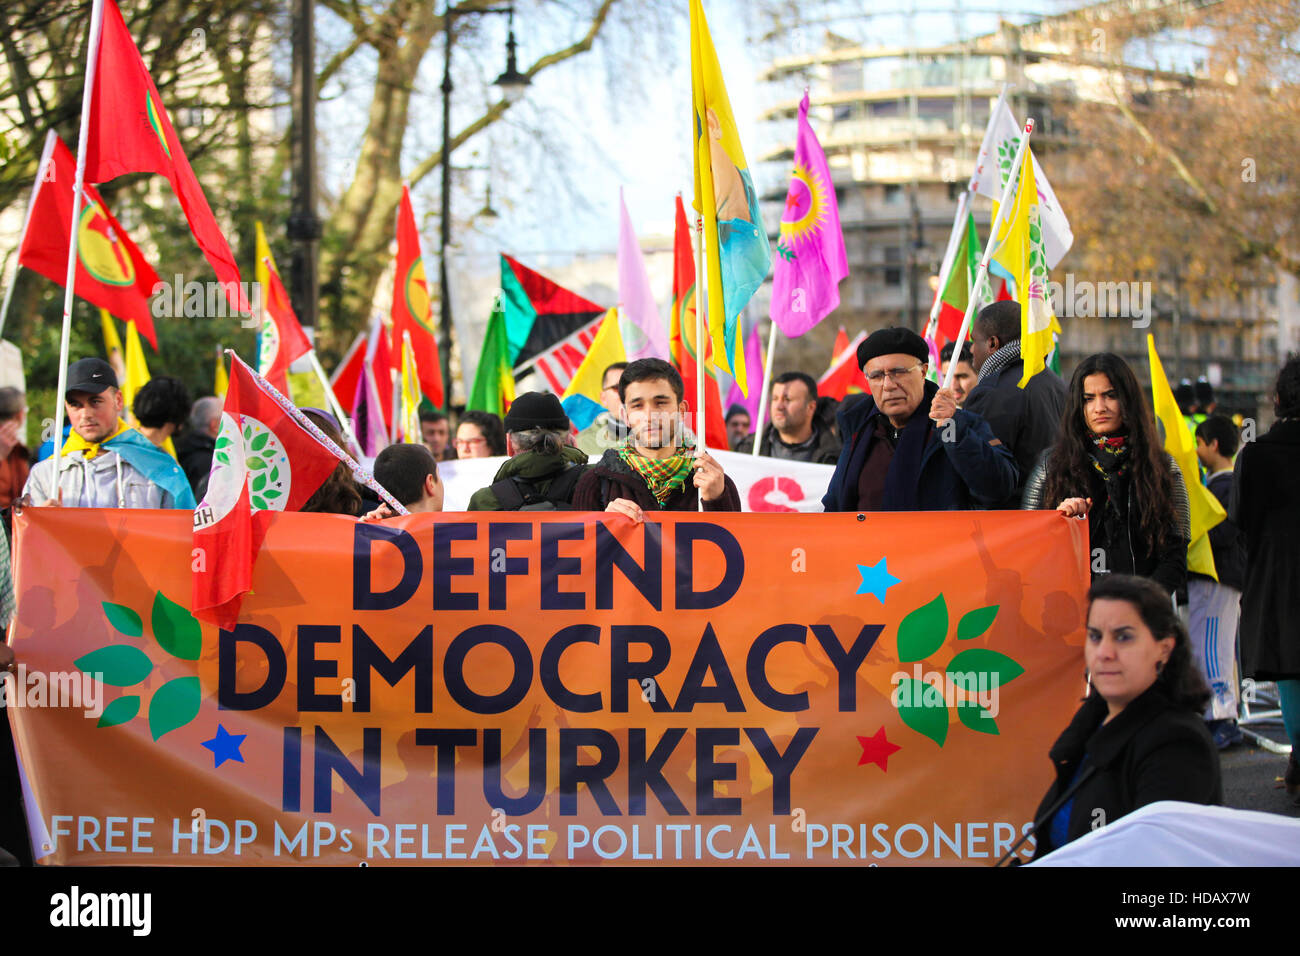 Turkish Embassy, London, UK 11 Dec 2016 - Hundreds of Kurdish protesters and their supporters demonstrate outside Turkish Embassy in London against Turkish government's repression on Kurds and demand the release of two joined leaders of Turkey's pro-Kurdish People's Democratic Party (HDP) and MPs and political prisoners in Turkey. Credit:  Dinendra Haria/Alamy Live News Stock Photo